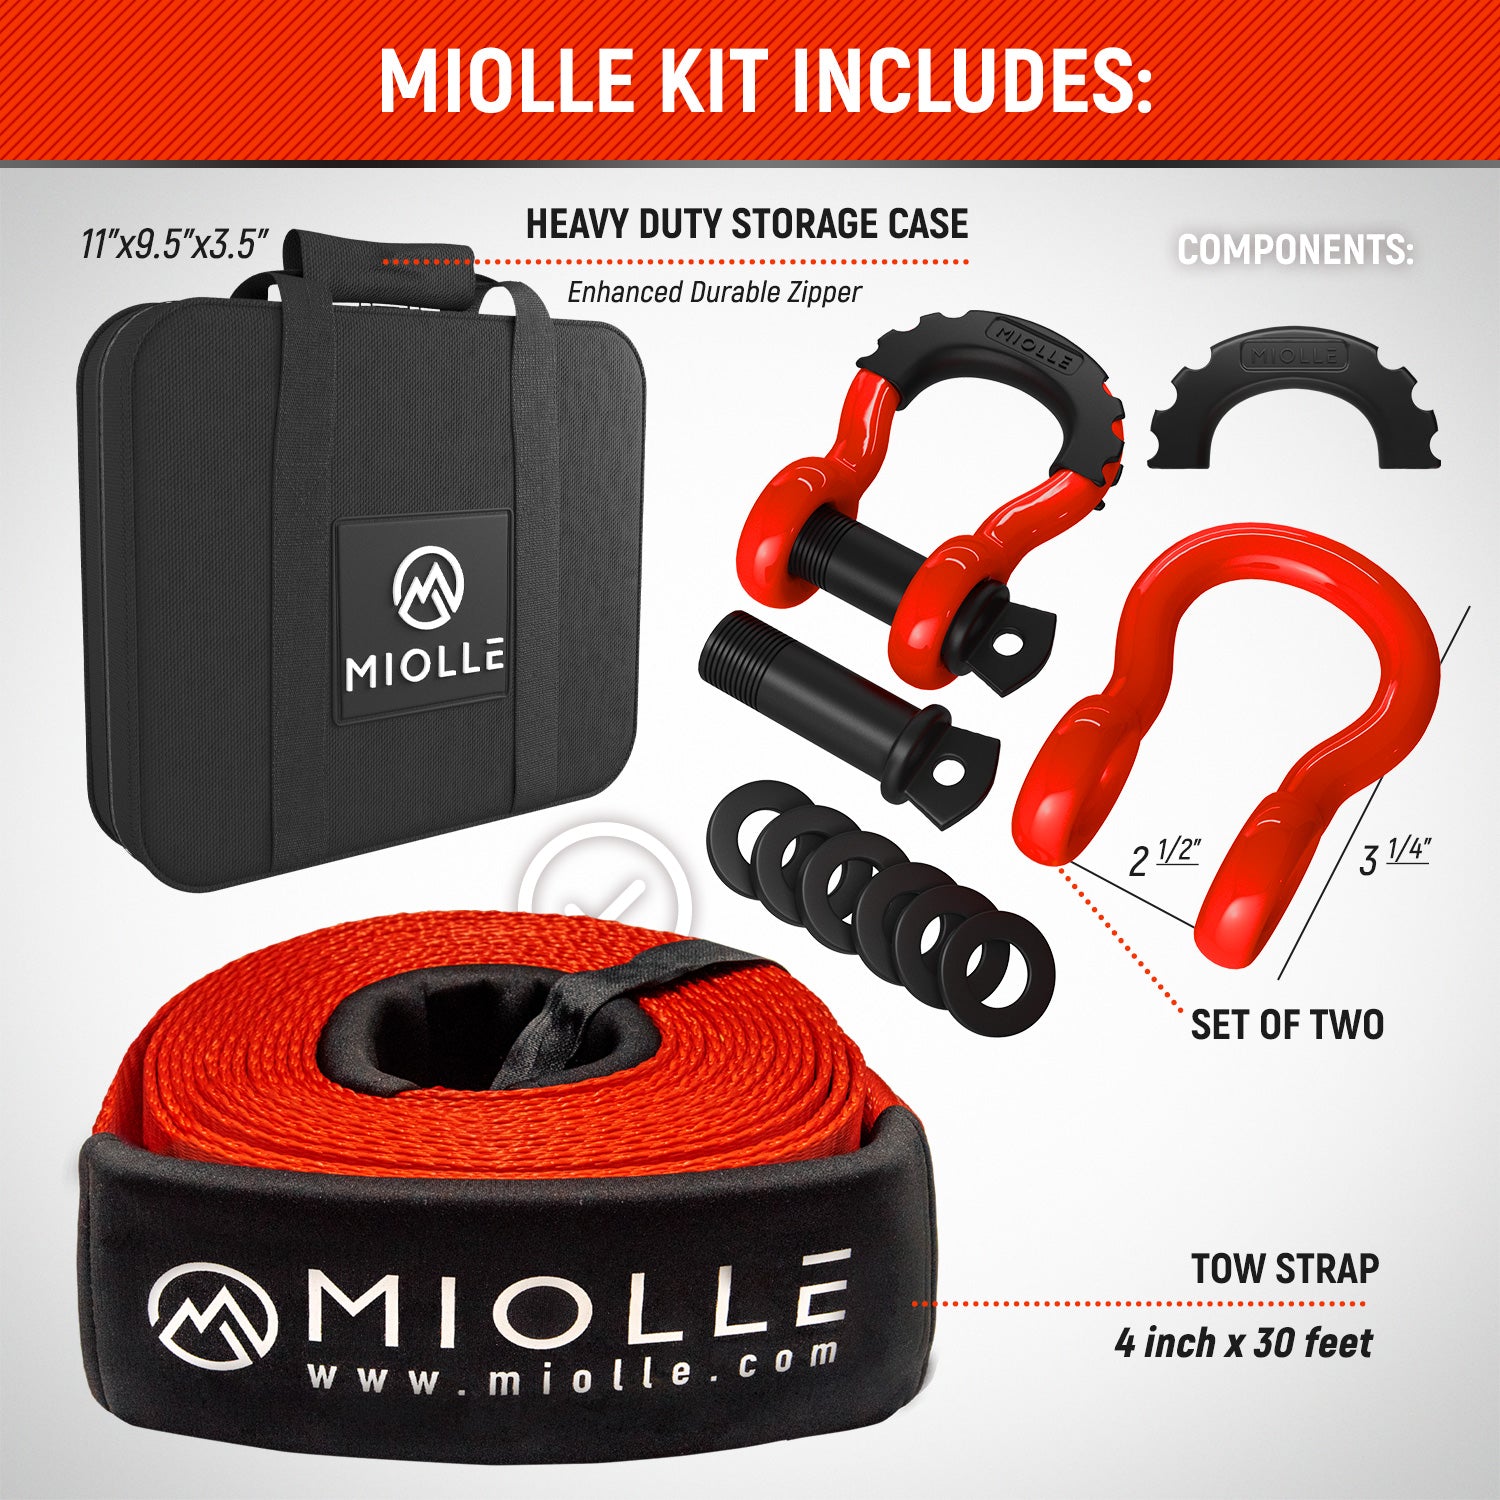 Miolle Tow Strap 4ax30a- 45000LBS MBS (Lab Tested) Recovery Strap Kit Includes: Tow Rope, 2 D-Ring Shackles MBS- 62700lbs, Storage Case